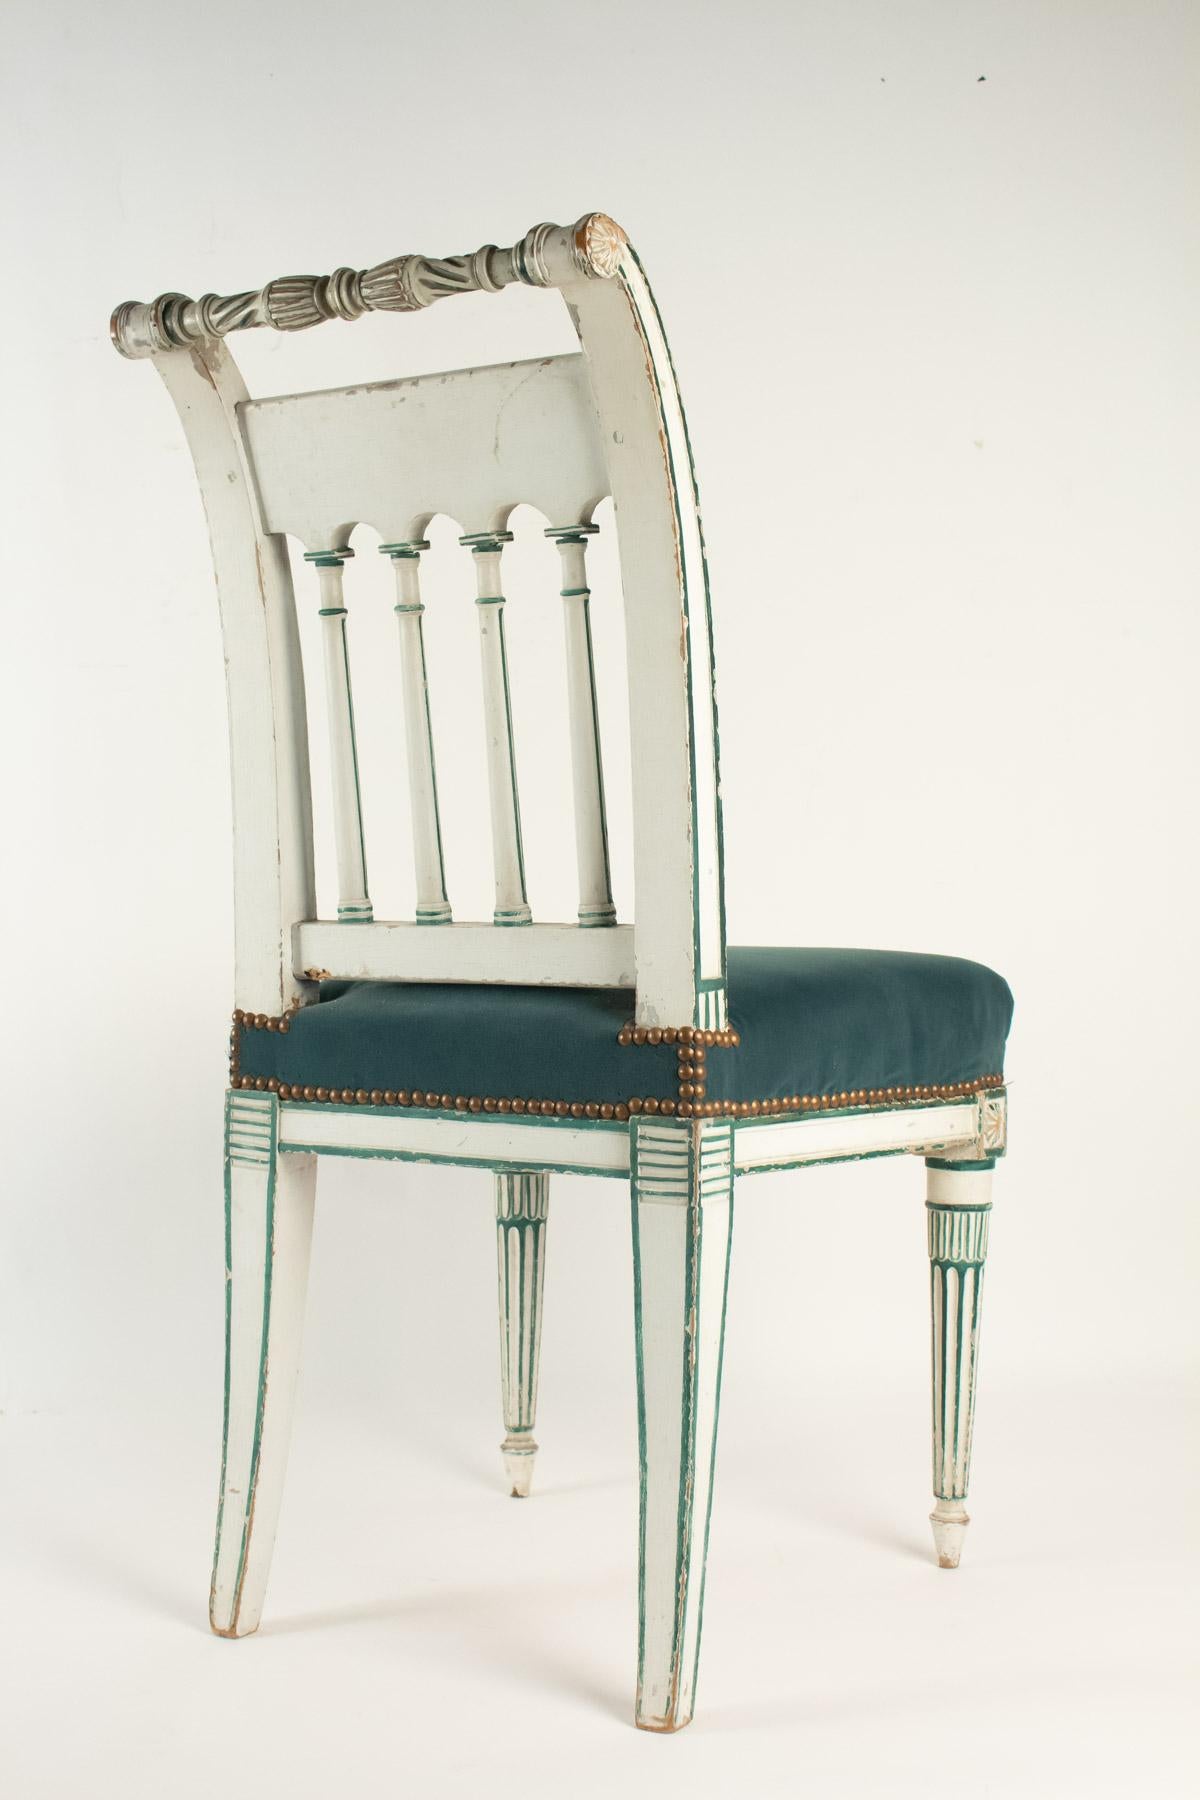 Wood Series of 6 Chairs Directoire Period, 19th Century